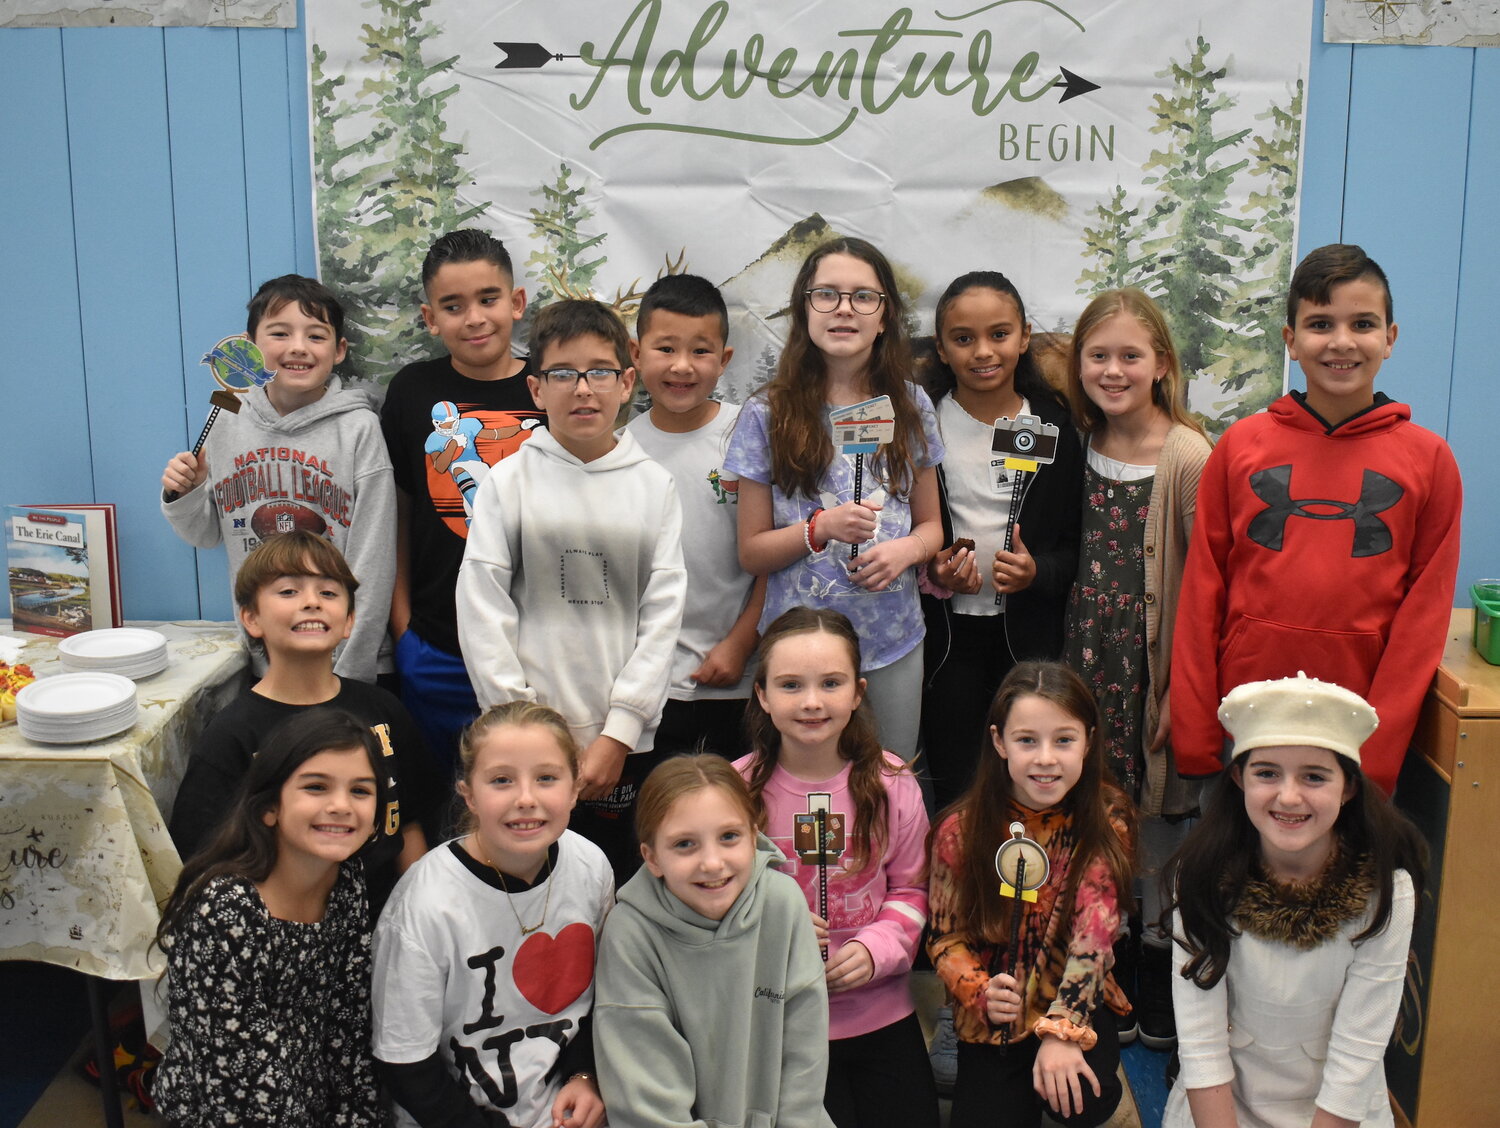 Mandalay Elementary School fourth graders celebrated the completion of their digital New York State region presentations on Nov. 14 with its first Travel Agency Day, which included a photo station.